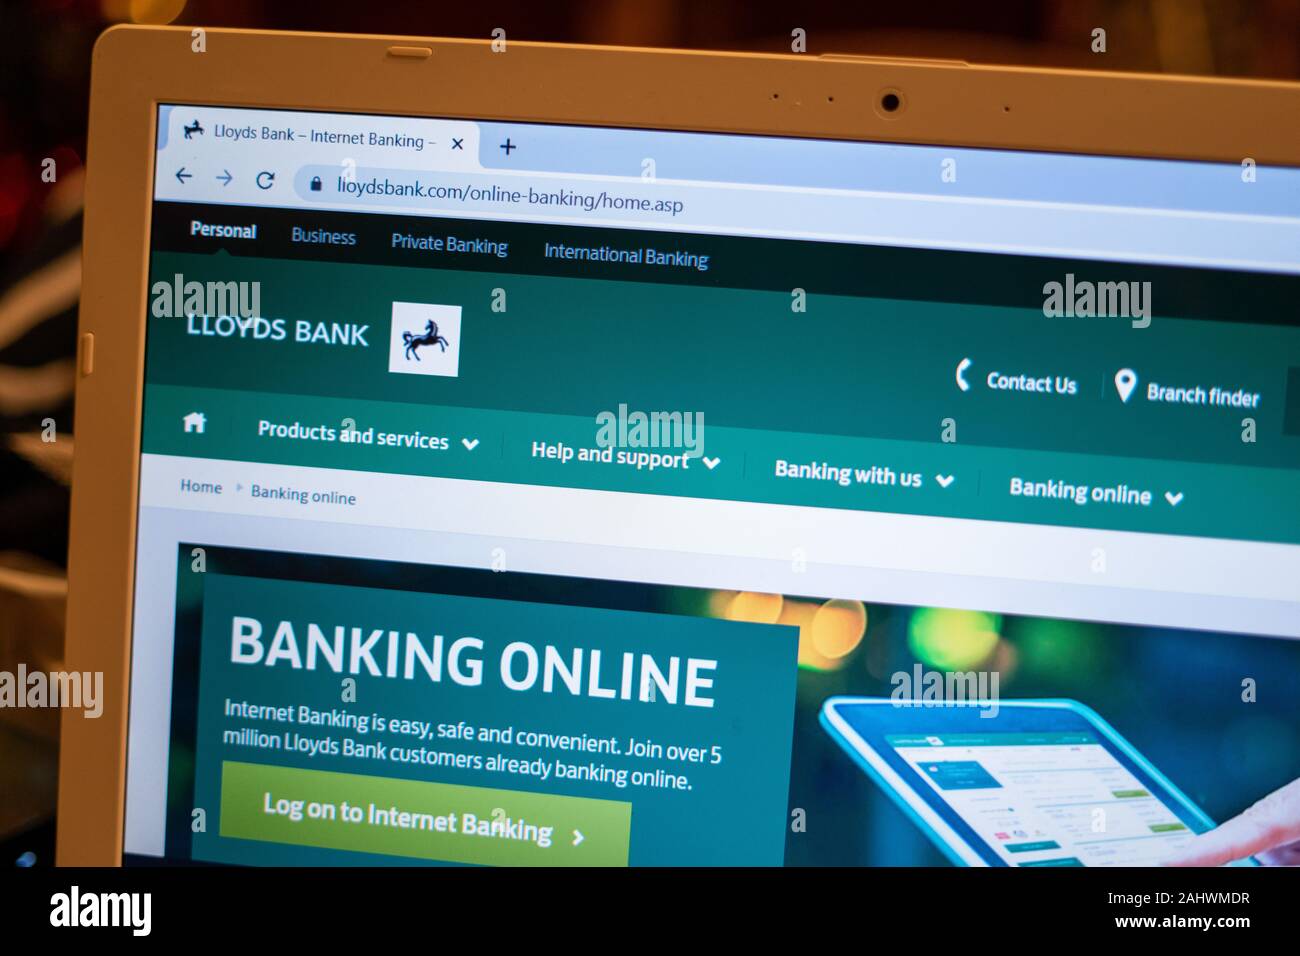 Lloyds bank online banking homepage shown on a computer screen Stock Photo